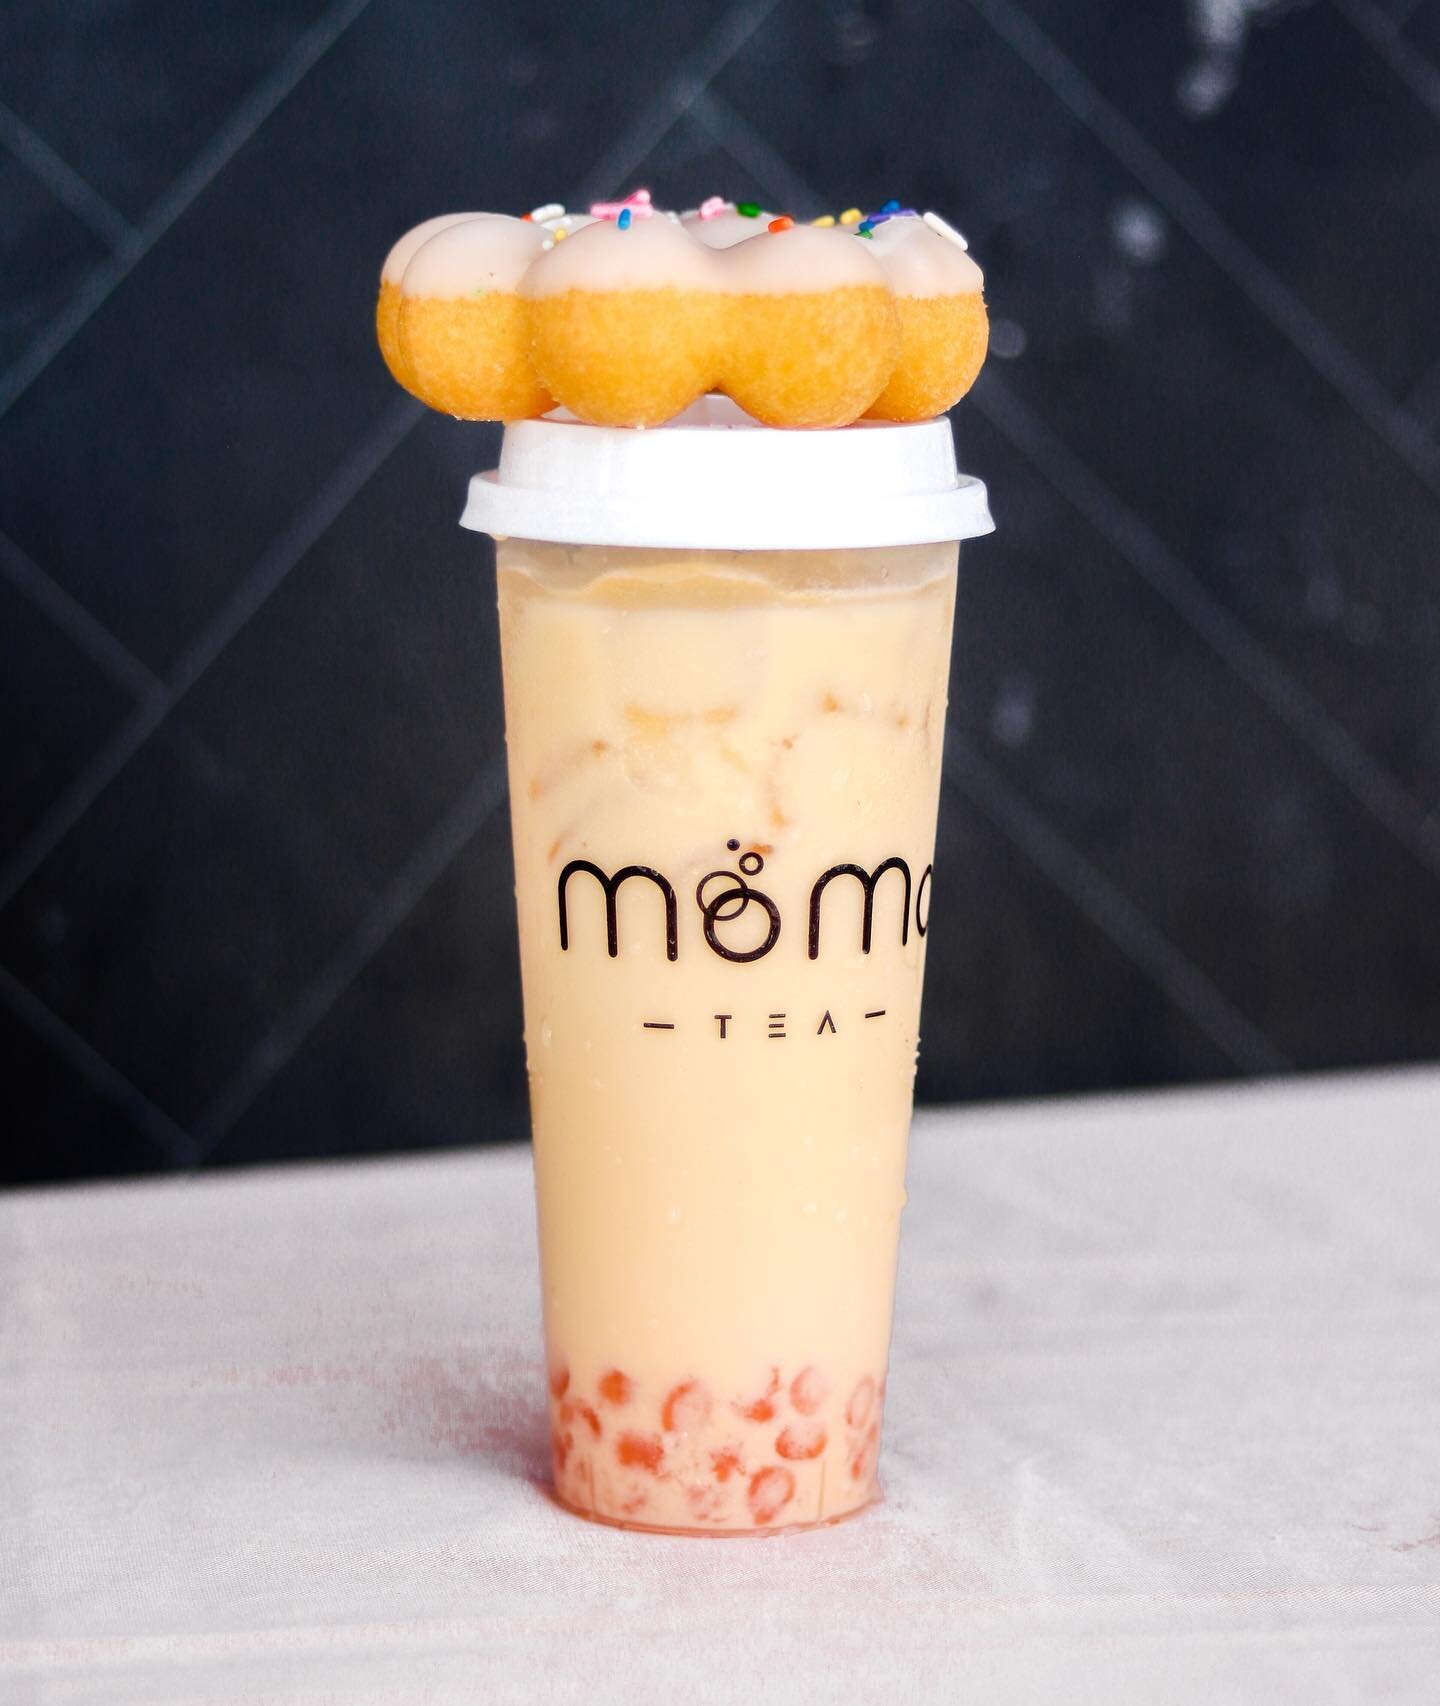 Mochi x MoMo 😋 Come enjoy a refreshing tea and a mochi donut with your besties! #SundayFunday

🕑 Open 11-7PM daily; we are closed on Tuesday&rsquo;s
&bull;
&bull;
&bull;
&bull;
#momotea #momoteabr #fruittea #milktea #batonrougefoodies #batonrougete